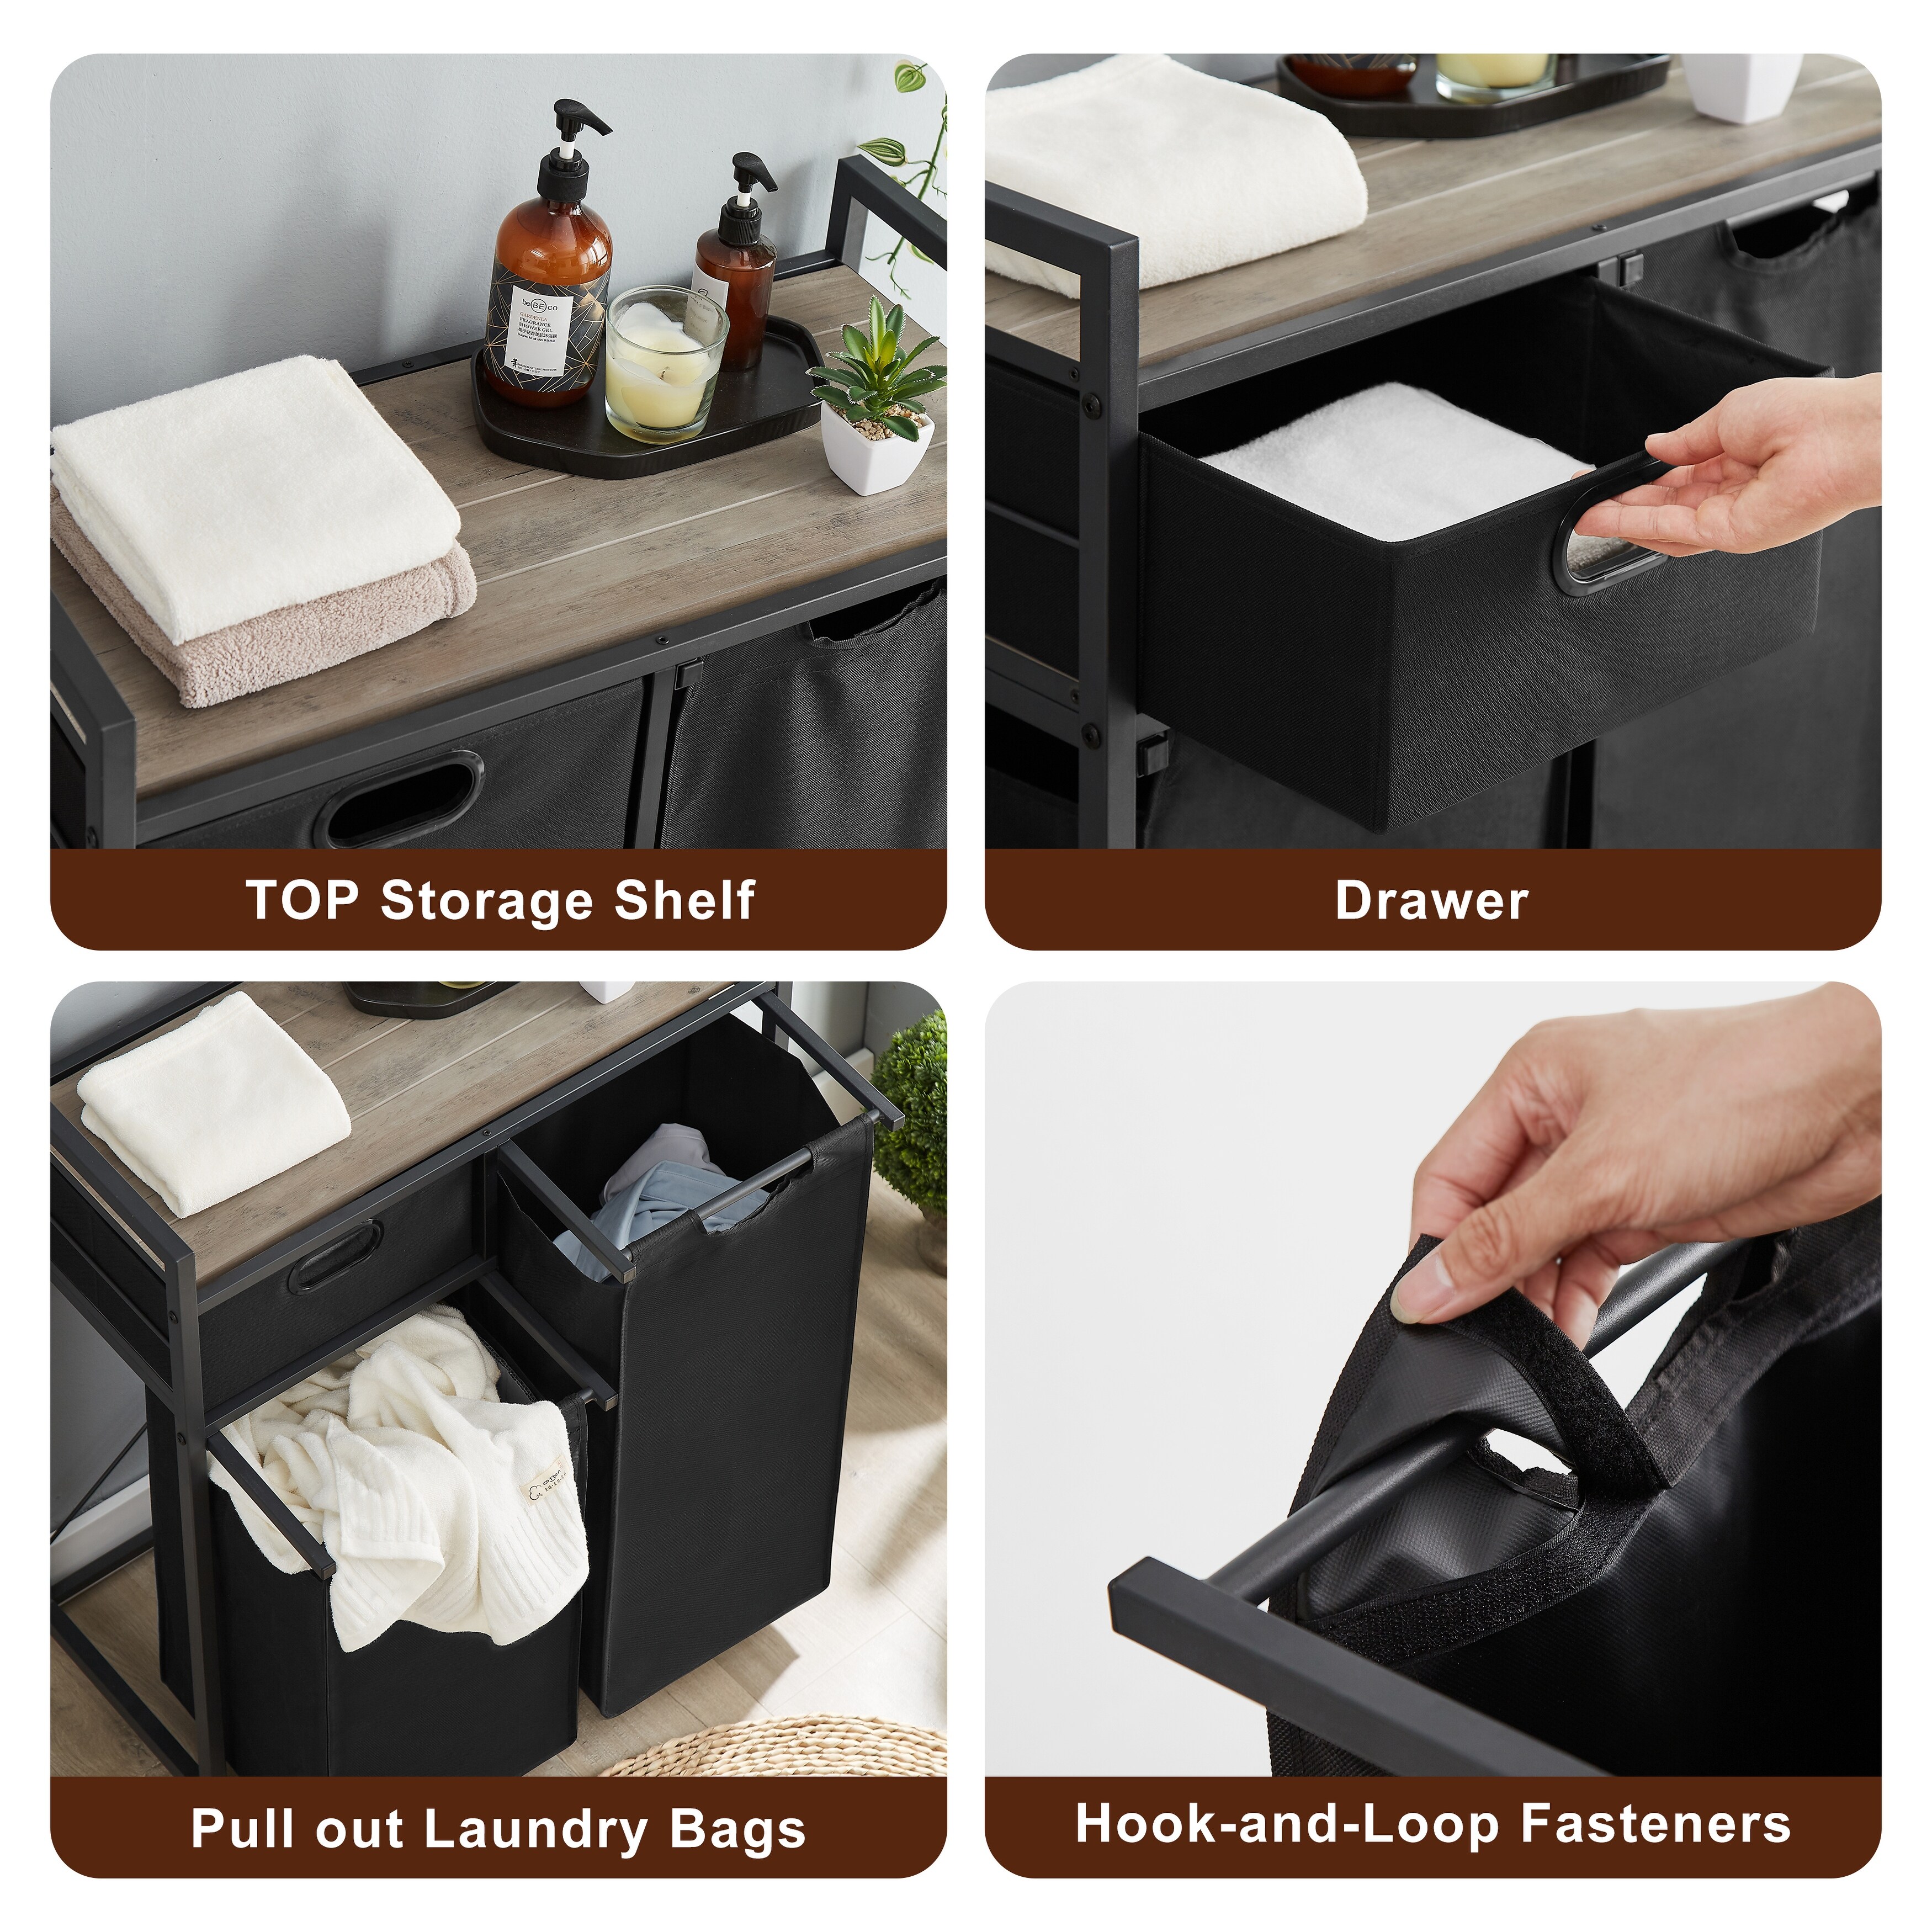 https://ak1.ostkcdn.com/images/products/is/images/direct/a820cc863fd0893efe6864a0cc7efc54522c3af9/Laundry-Basket%2C-Laundry-Hamper-with-Drawer%2C-2-Laundry-Sorter%2C-with-2-Bags%2C-1-Storage-Rack.jpg